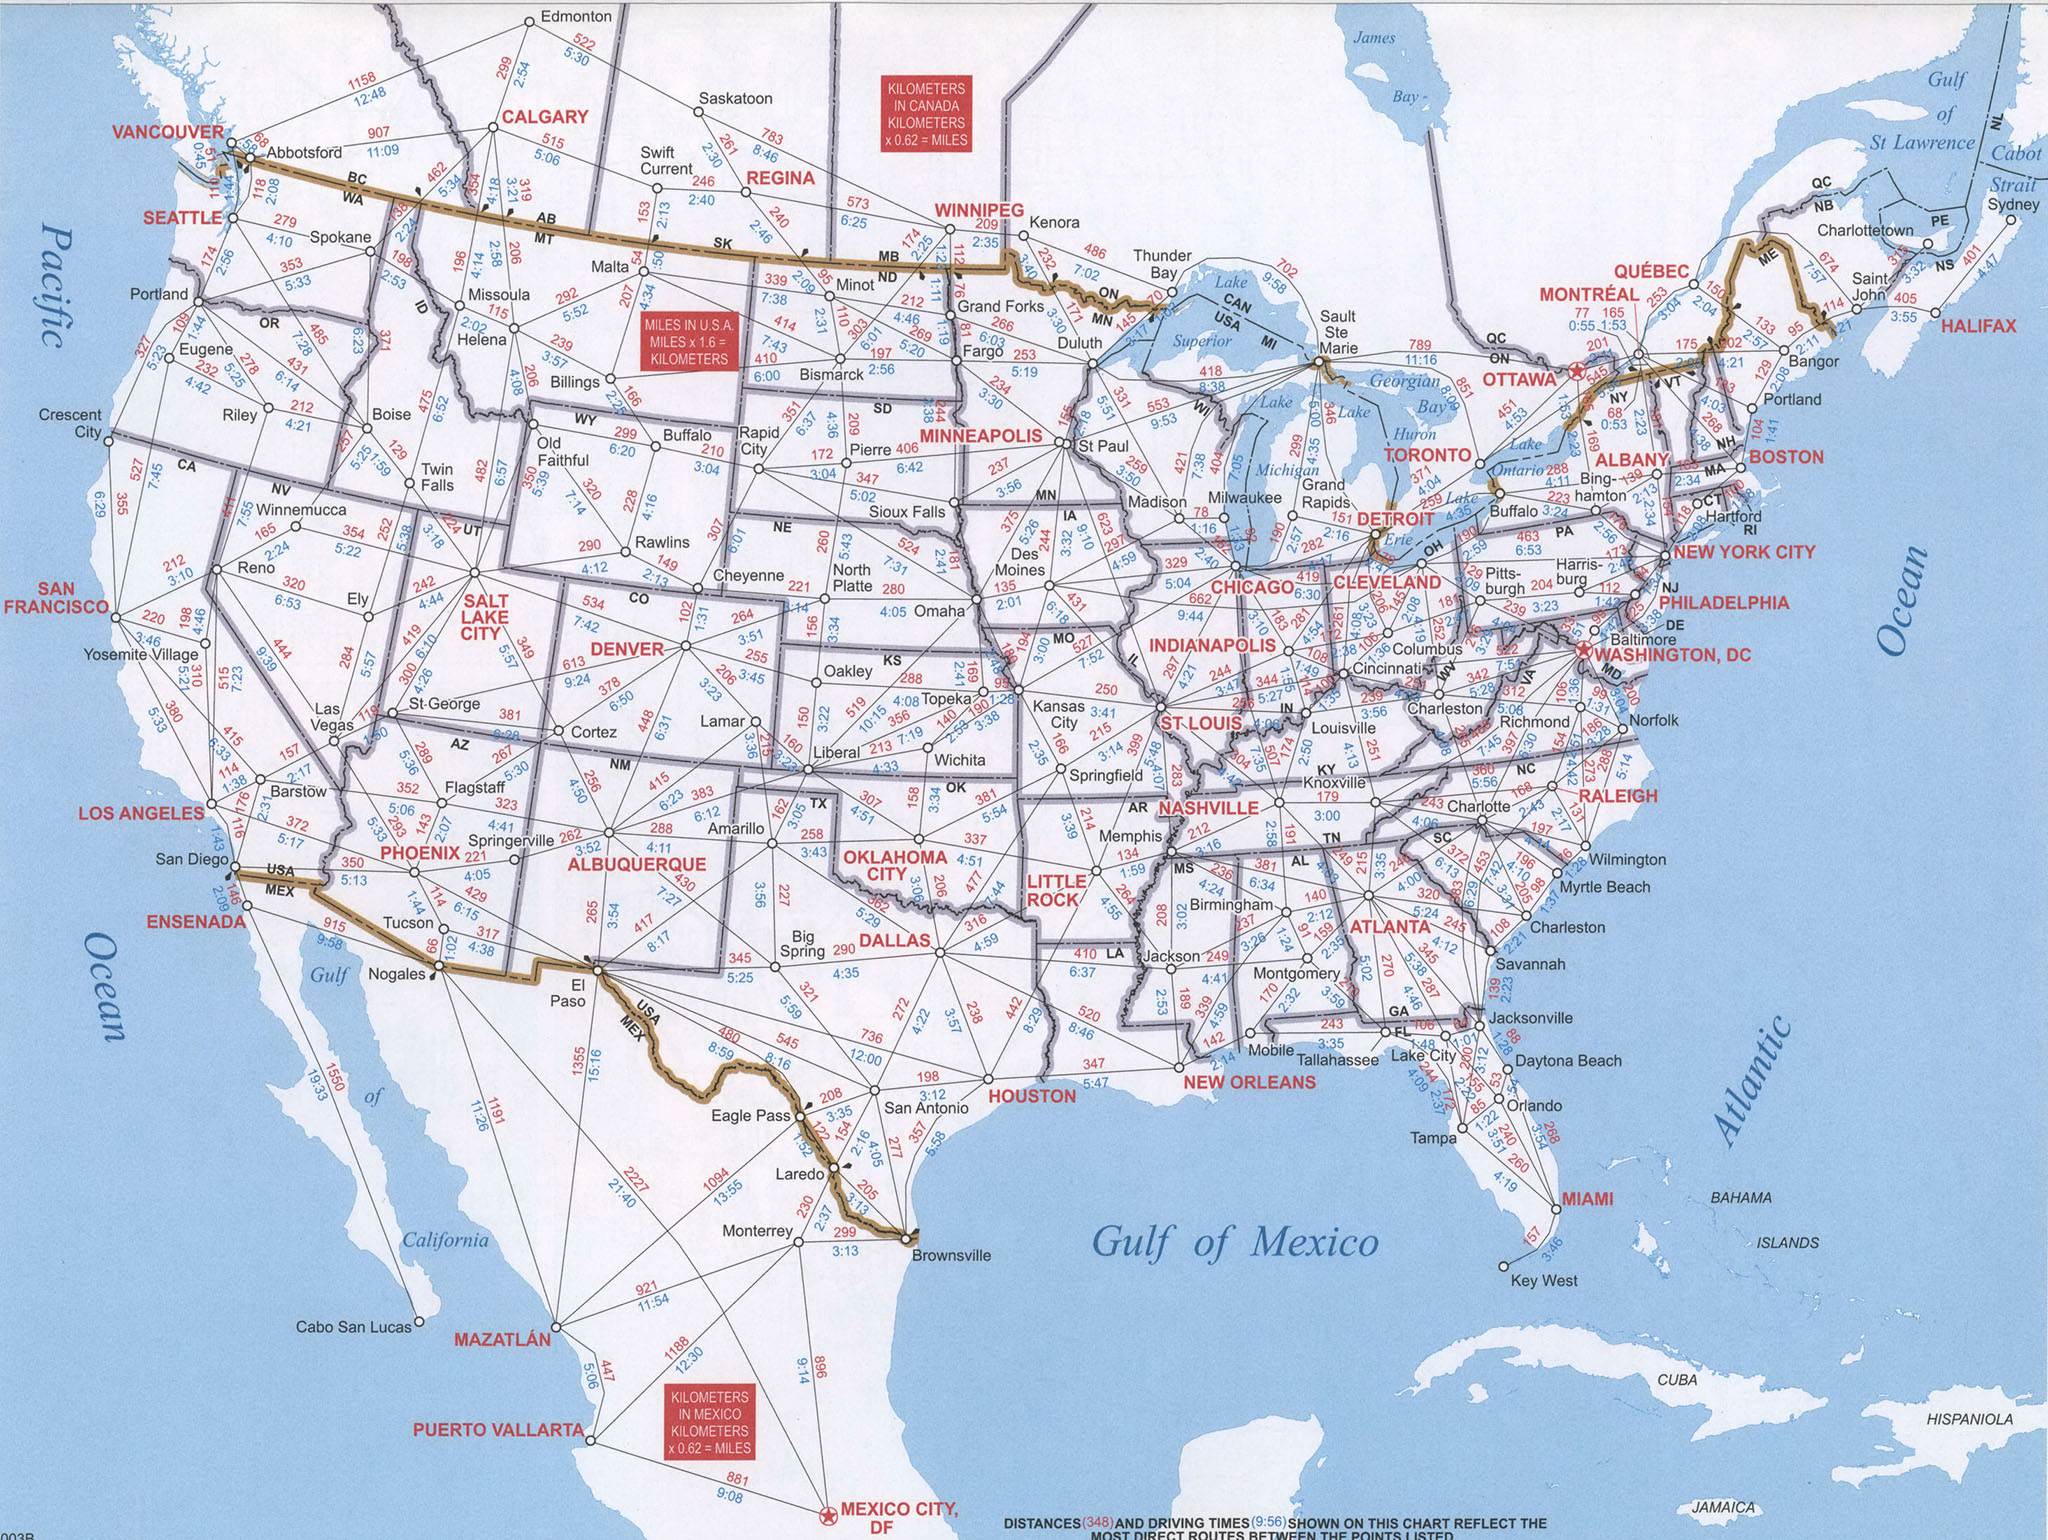 Route map of USA with distance in miles